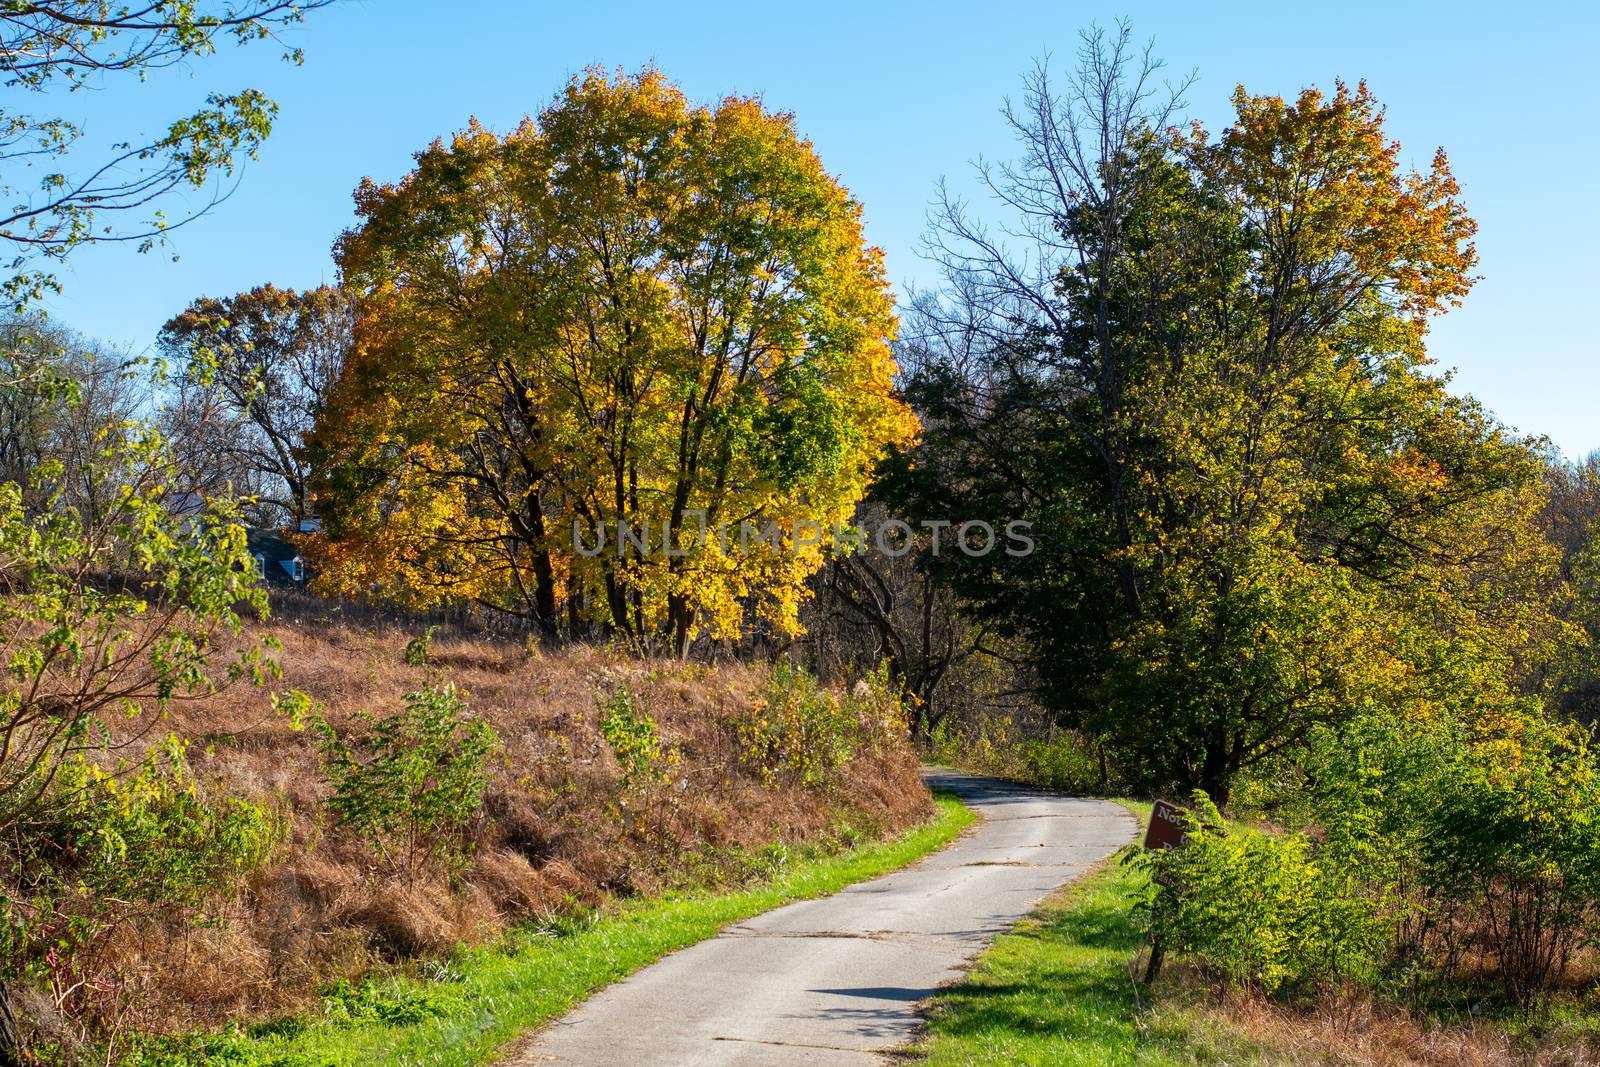 A Paved Pathway Leading Into an Autumn Forest at Valley Forge National Historical Park